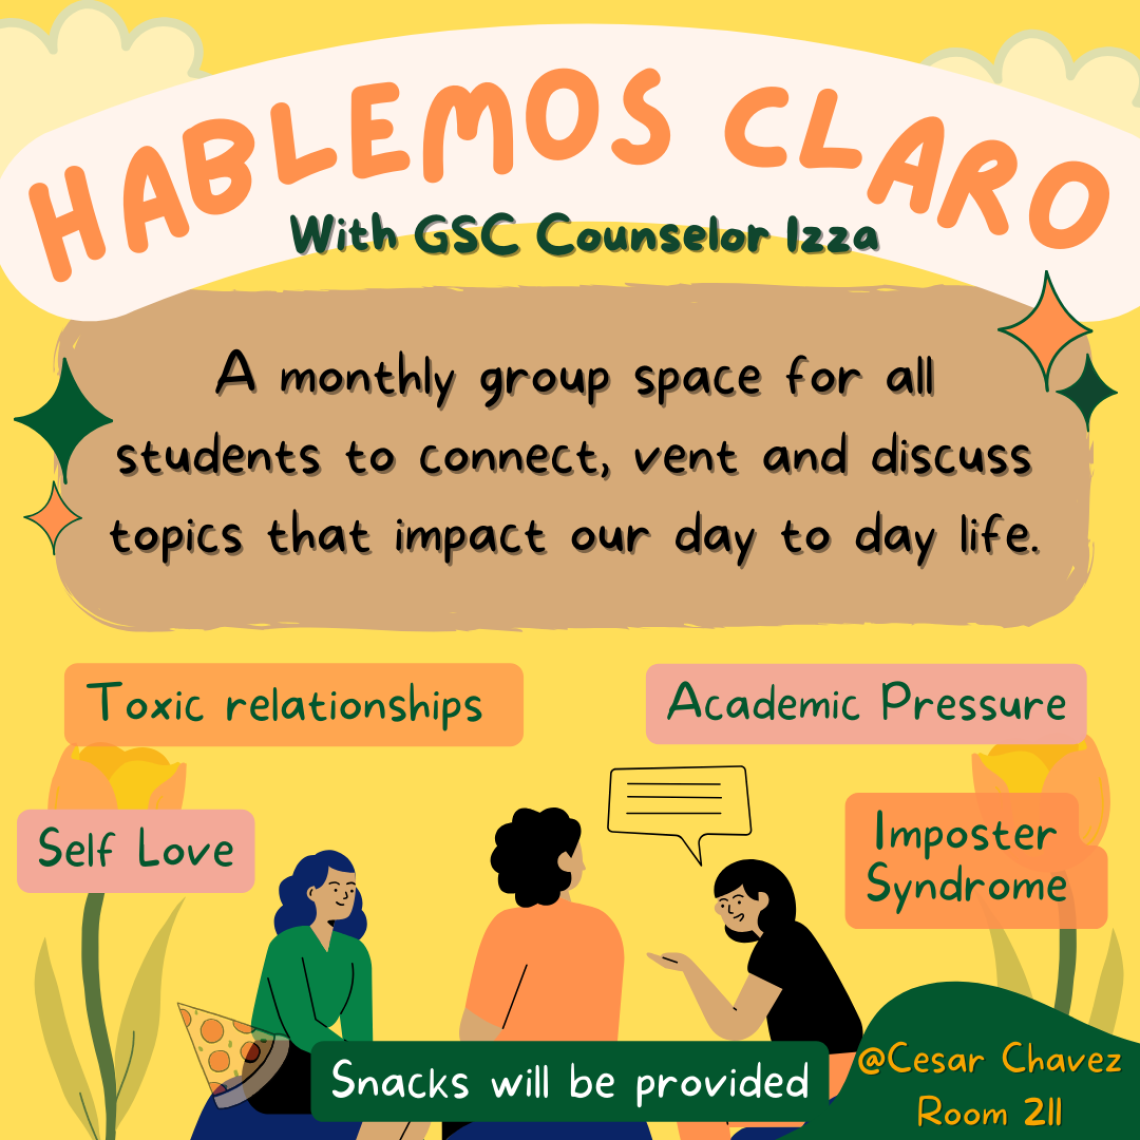 The first image is a yellow and white sign with the following text: HABLEMOS CLARO With GSC Counselor Izza A monthly group space for all students to connect, vent and discuss topics that impact our day-to-day life. Topics include toxic relationships, academic pressure, self-love, and imposter syndrome. Snacks will be provided. Location: Cesar Chavez, Room 211. 